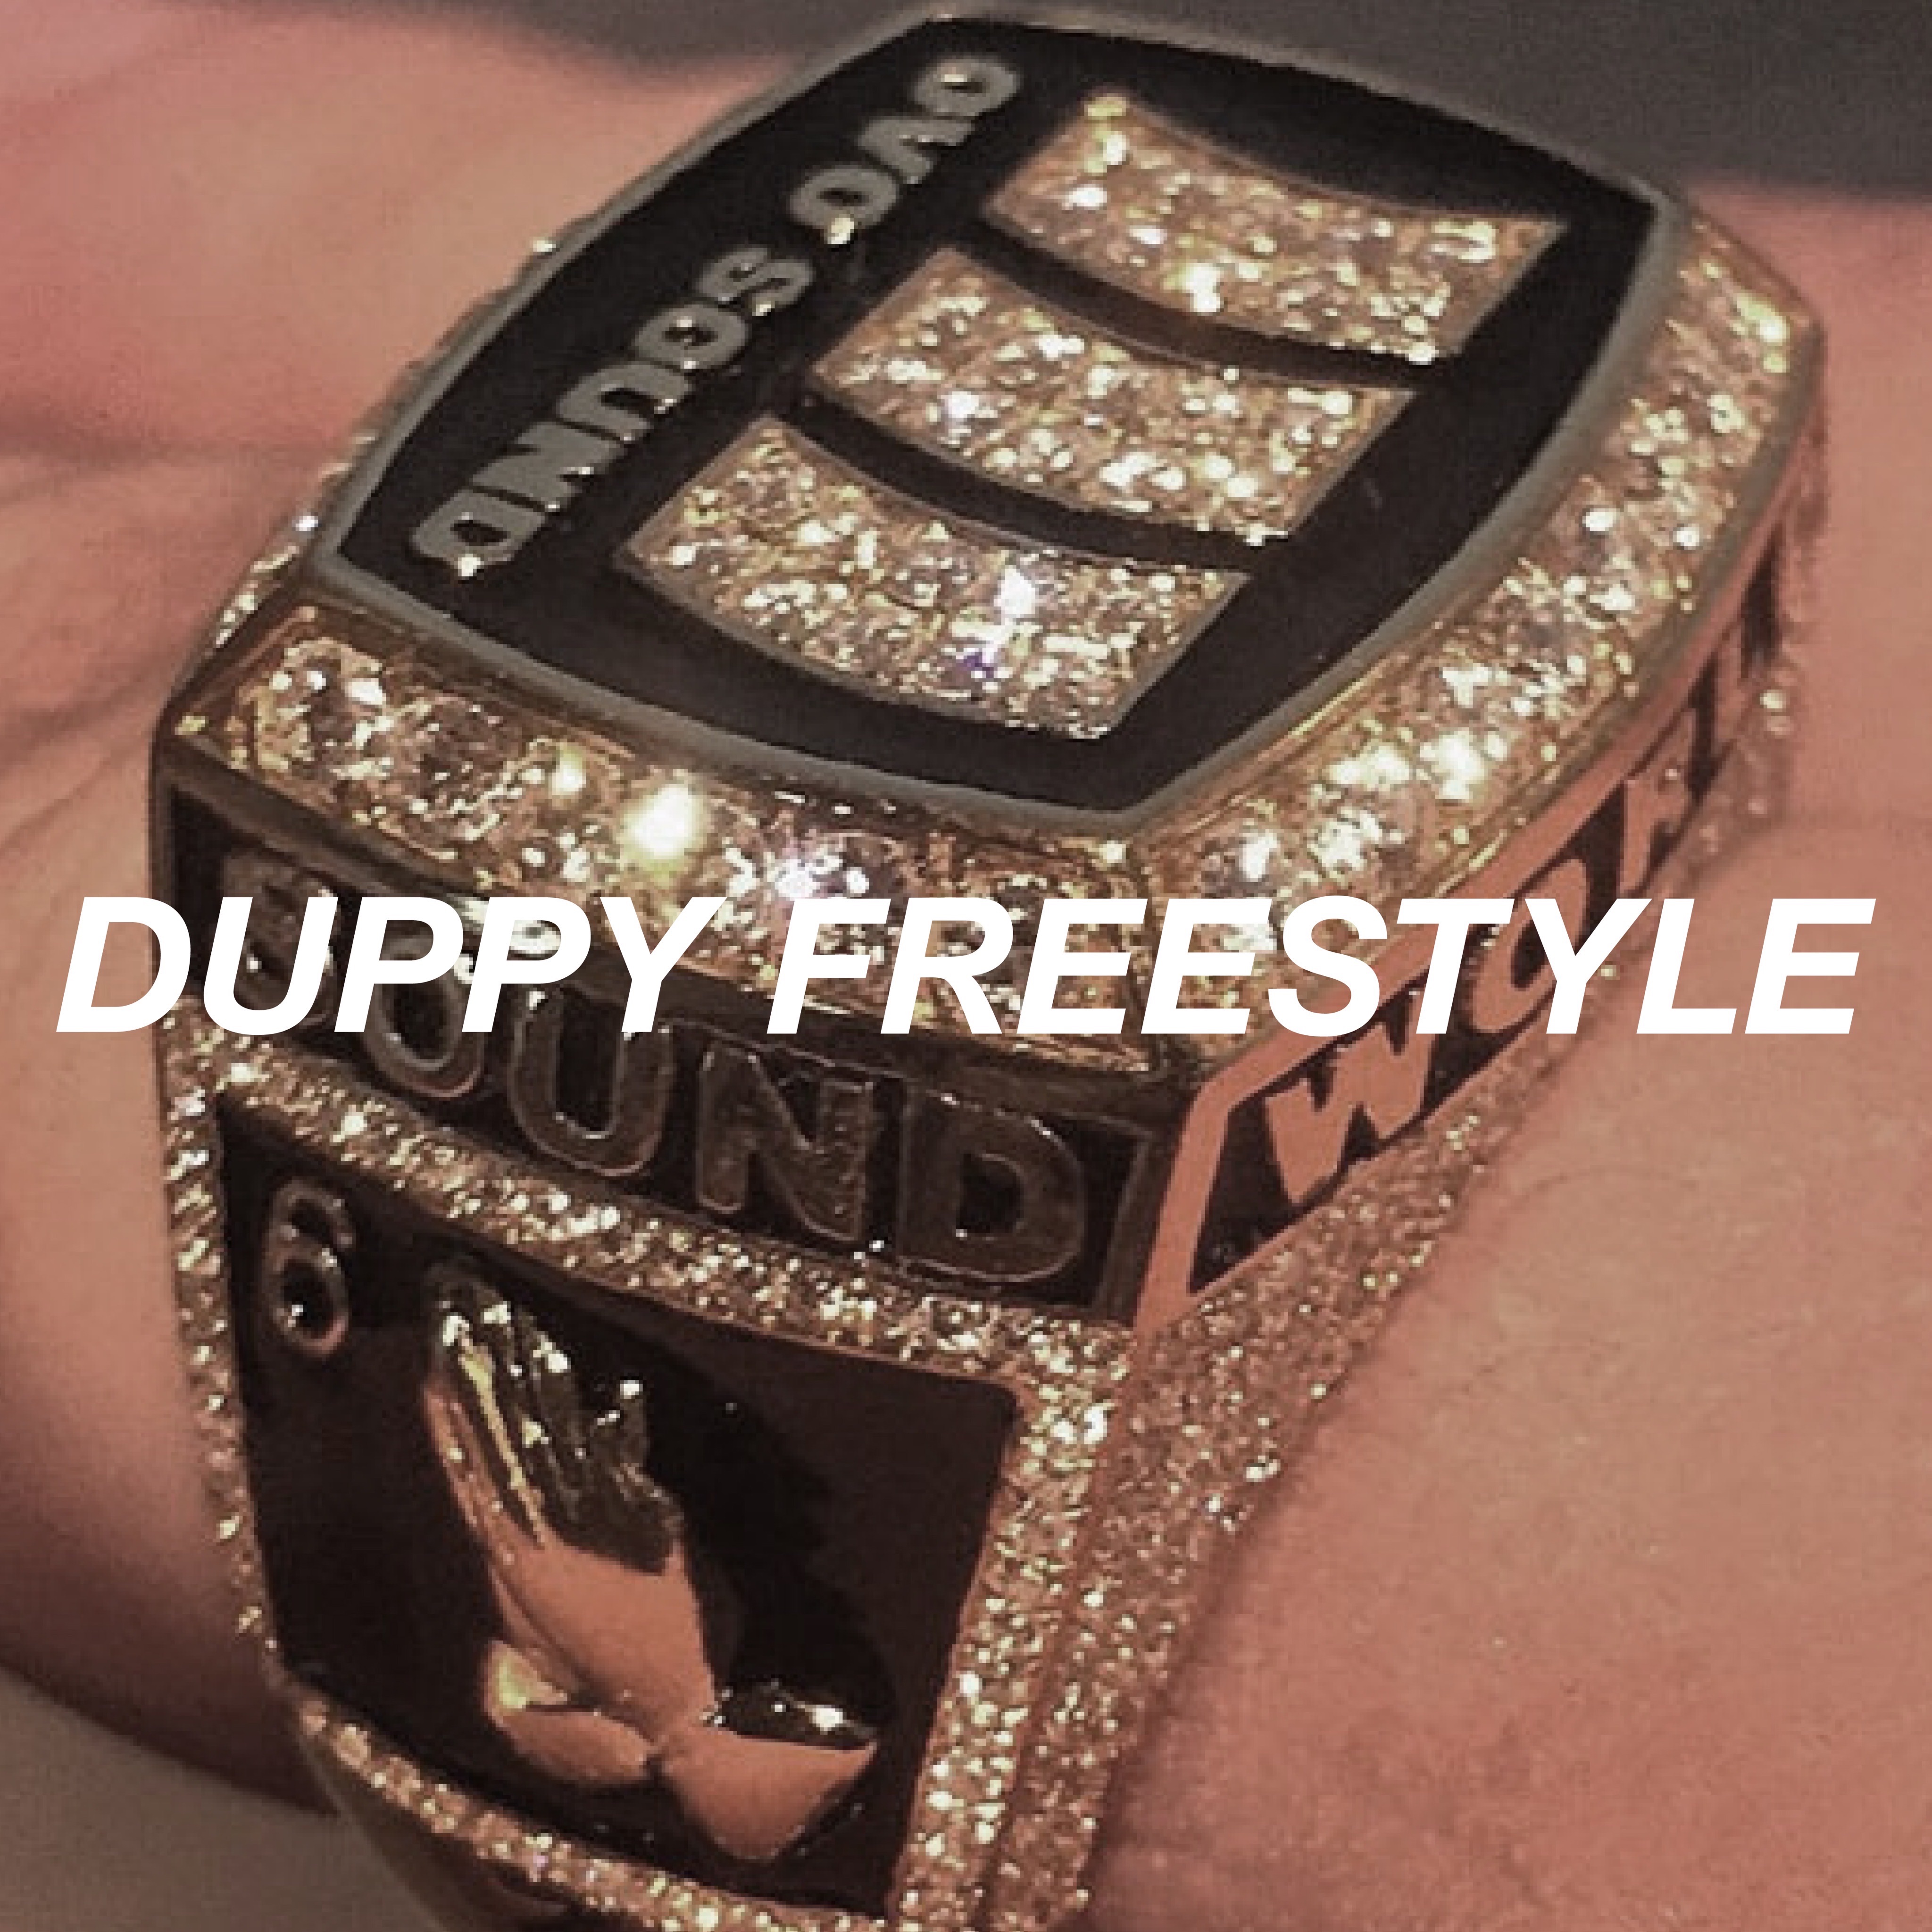 Drake Fires Back At Pusha T On “Duppy Freestyle”